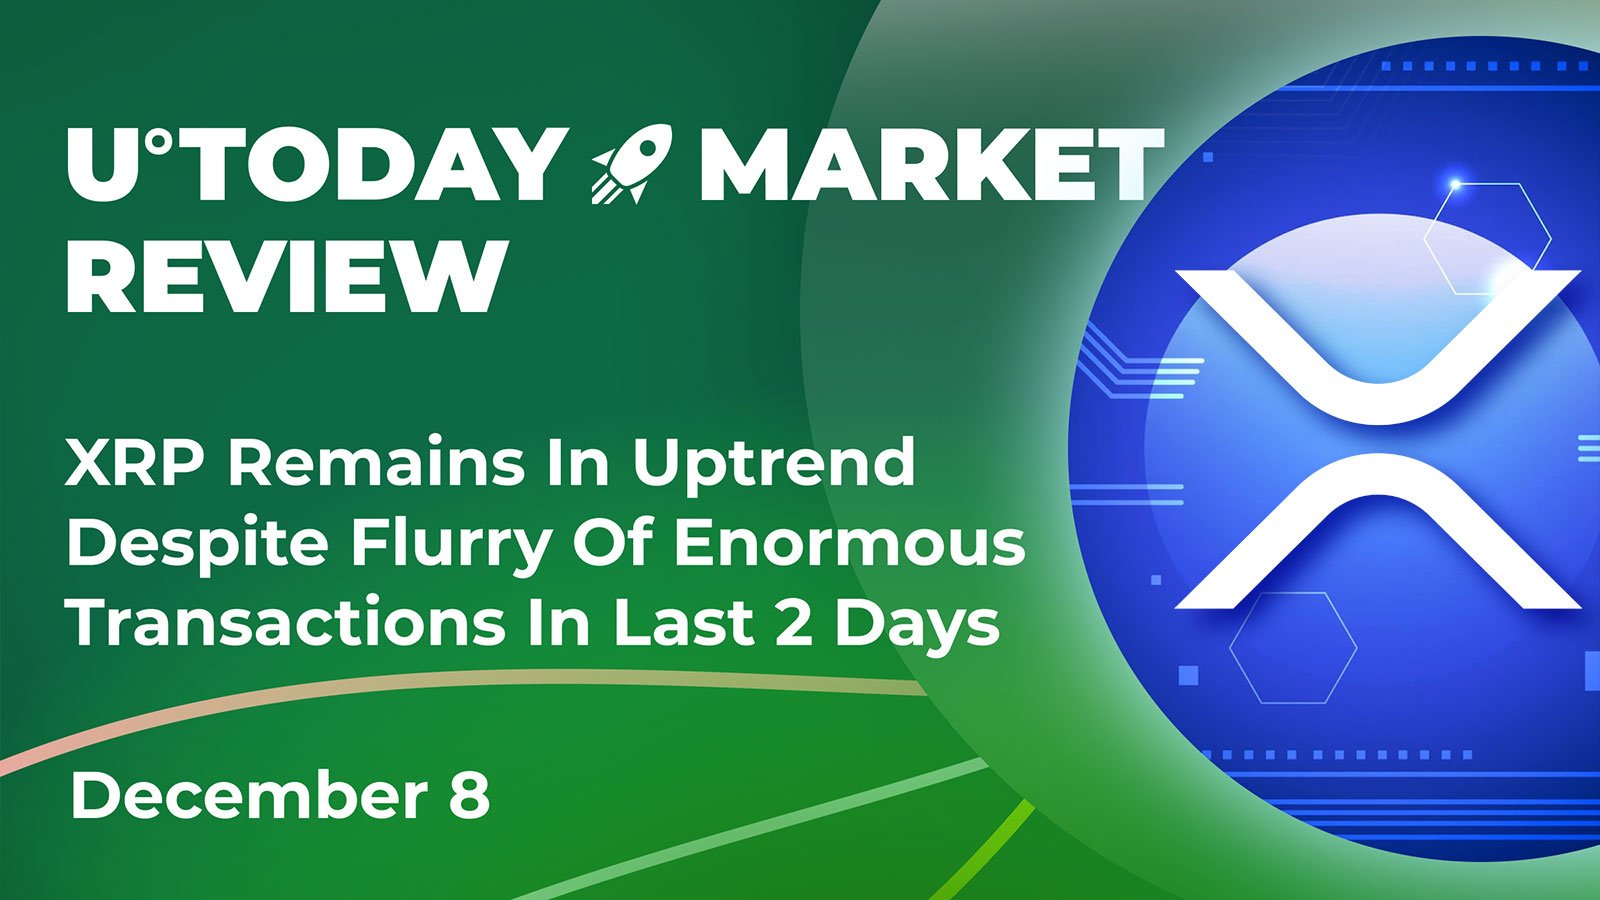 XRP Remains in Uptrend Despite Flurry of Enormous Transactions in Last 2 Days: Crypto Market Review, Dec. 8